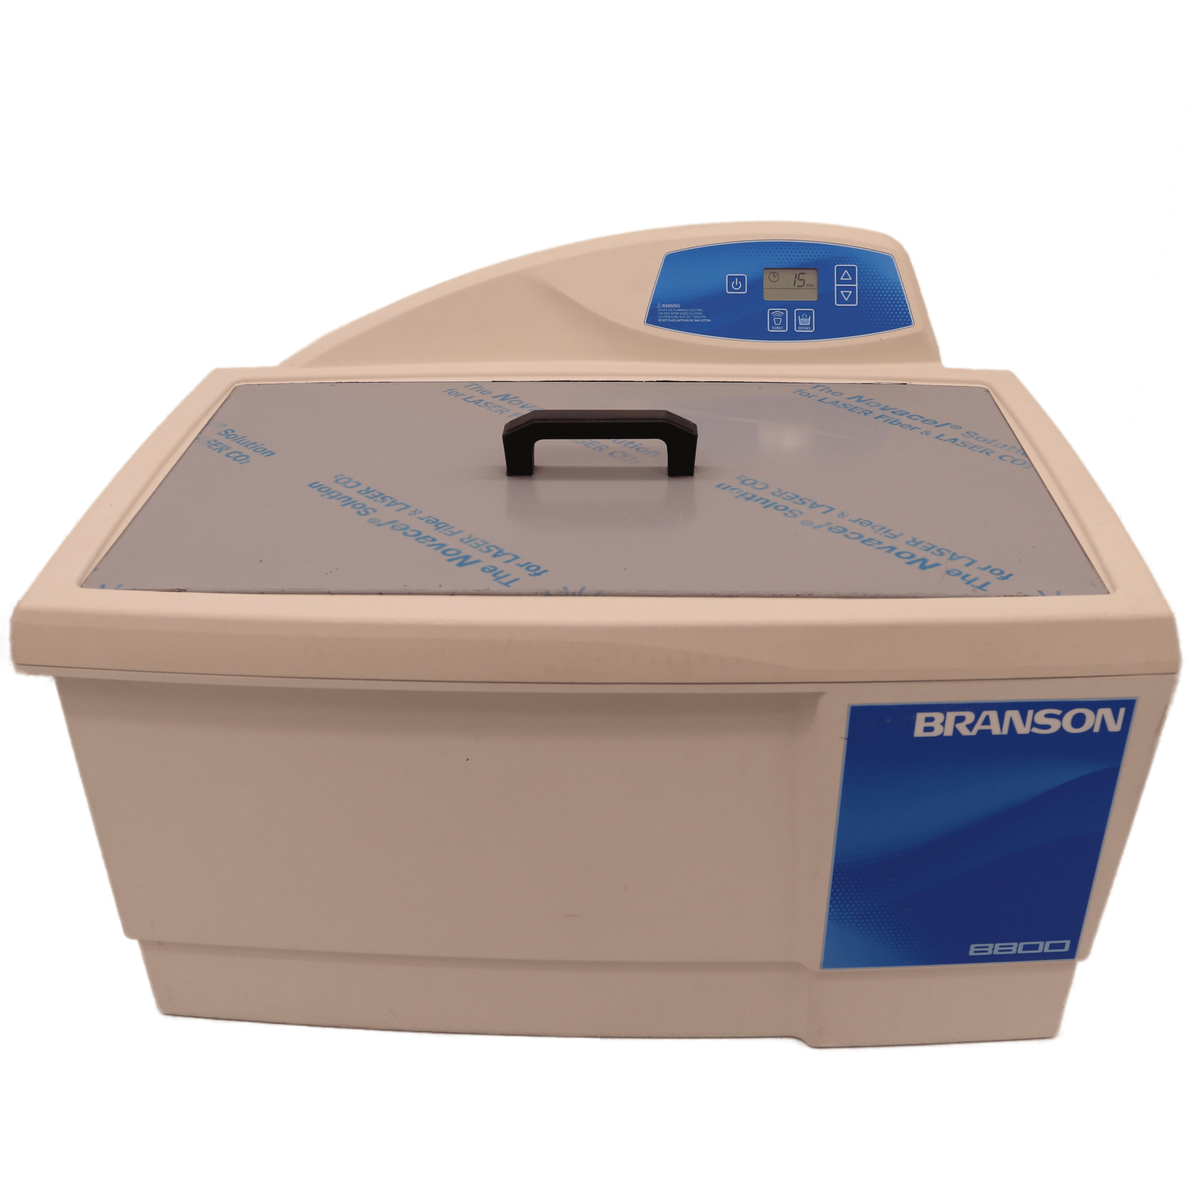 Branson Digital Timer Ultrasonic Cleaner 8800 CPX8800 CPX-952-819R